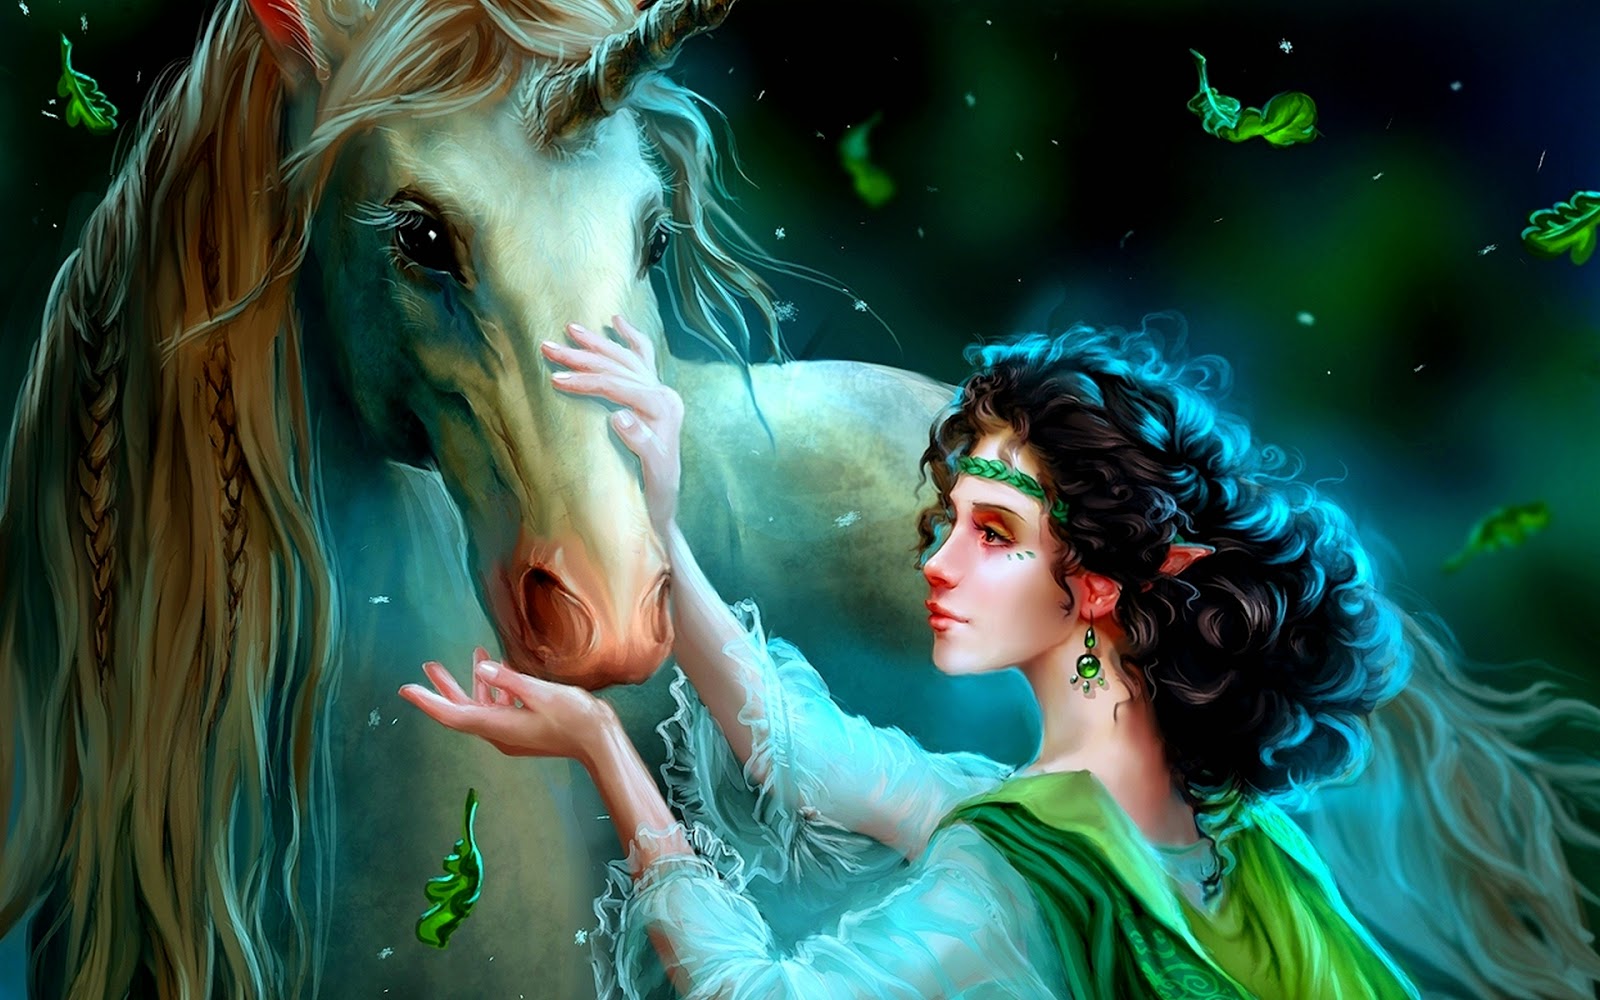 Princess With Unicorn Horse Fairy Tale Story Image For